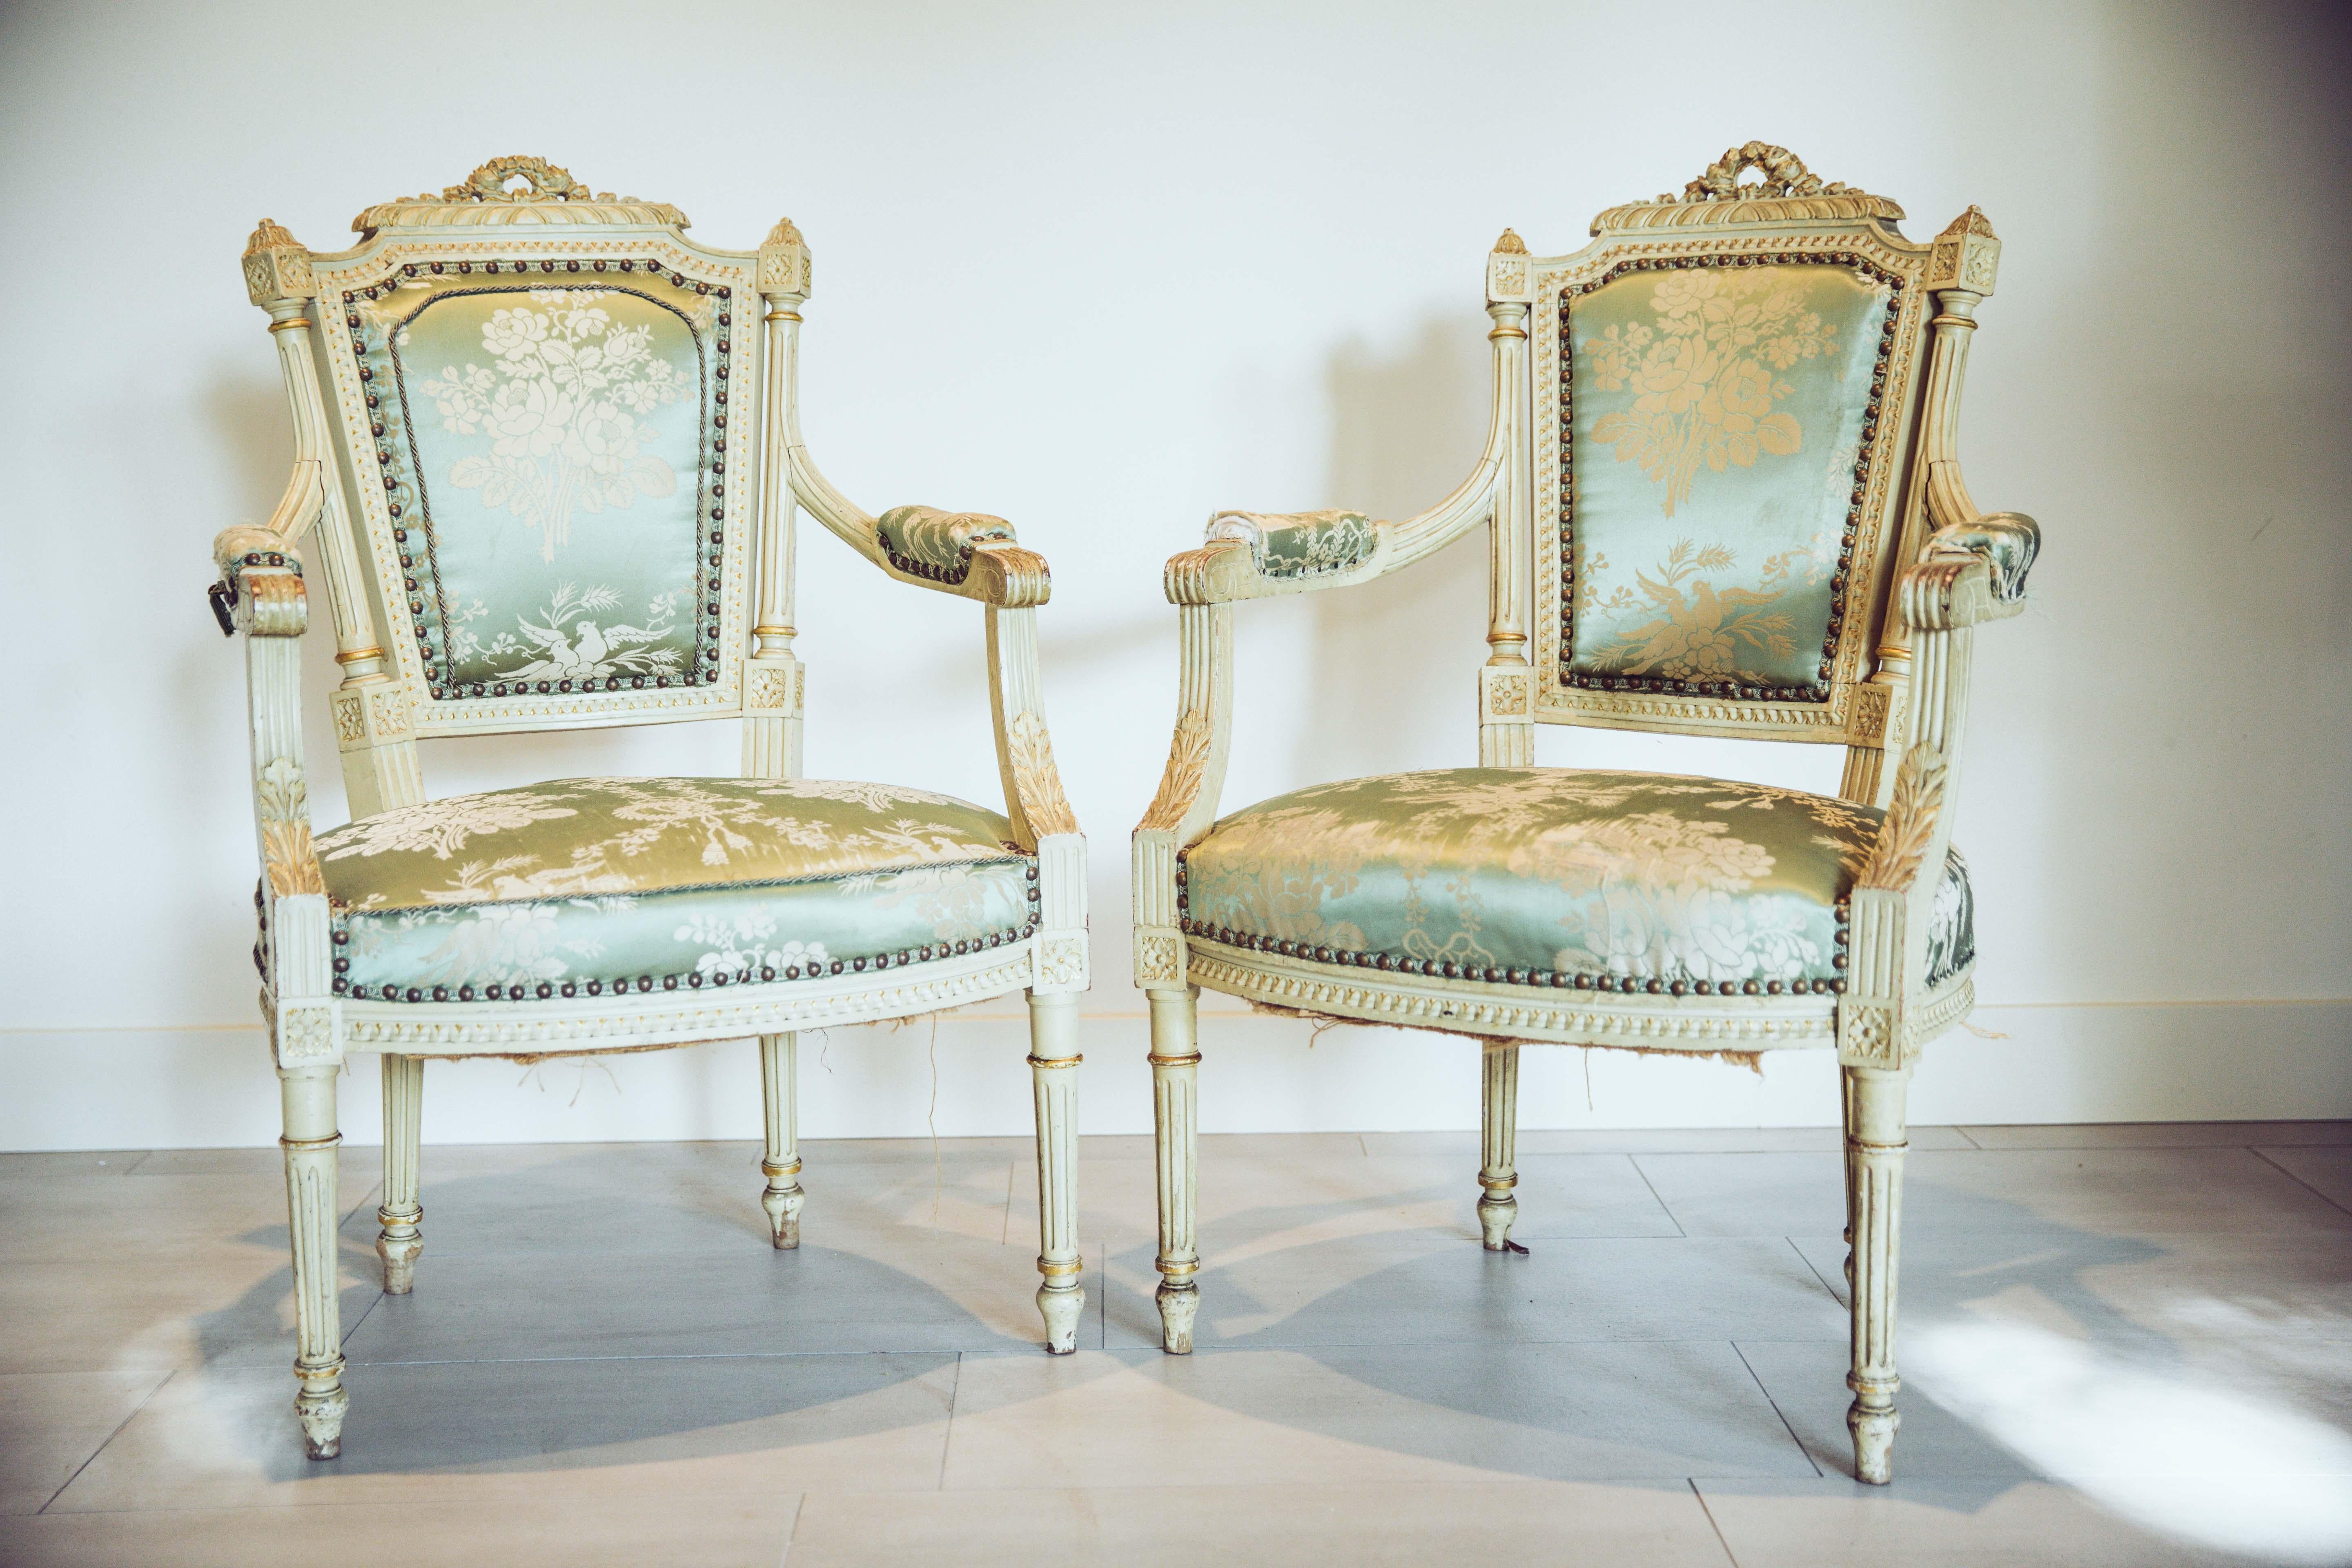 19th century pair of open arm fauteuils in the Louis XVI style. Beautiful original painted finish in a creamy white finish. Lovely carved details along the seat bottom edges, with a Classic Louis XVI fluted legs. The arms have with upholstered arm